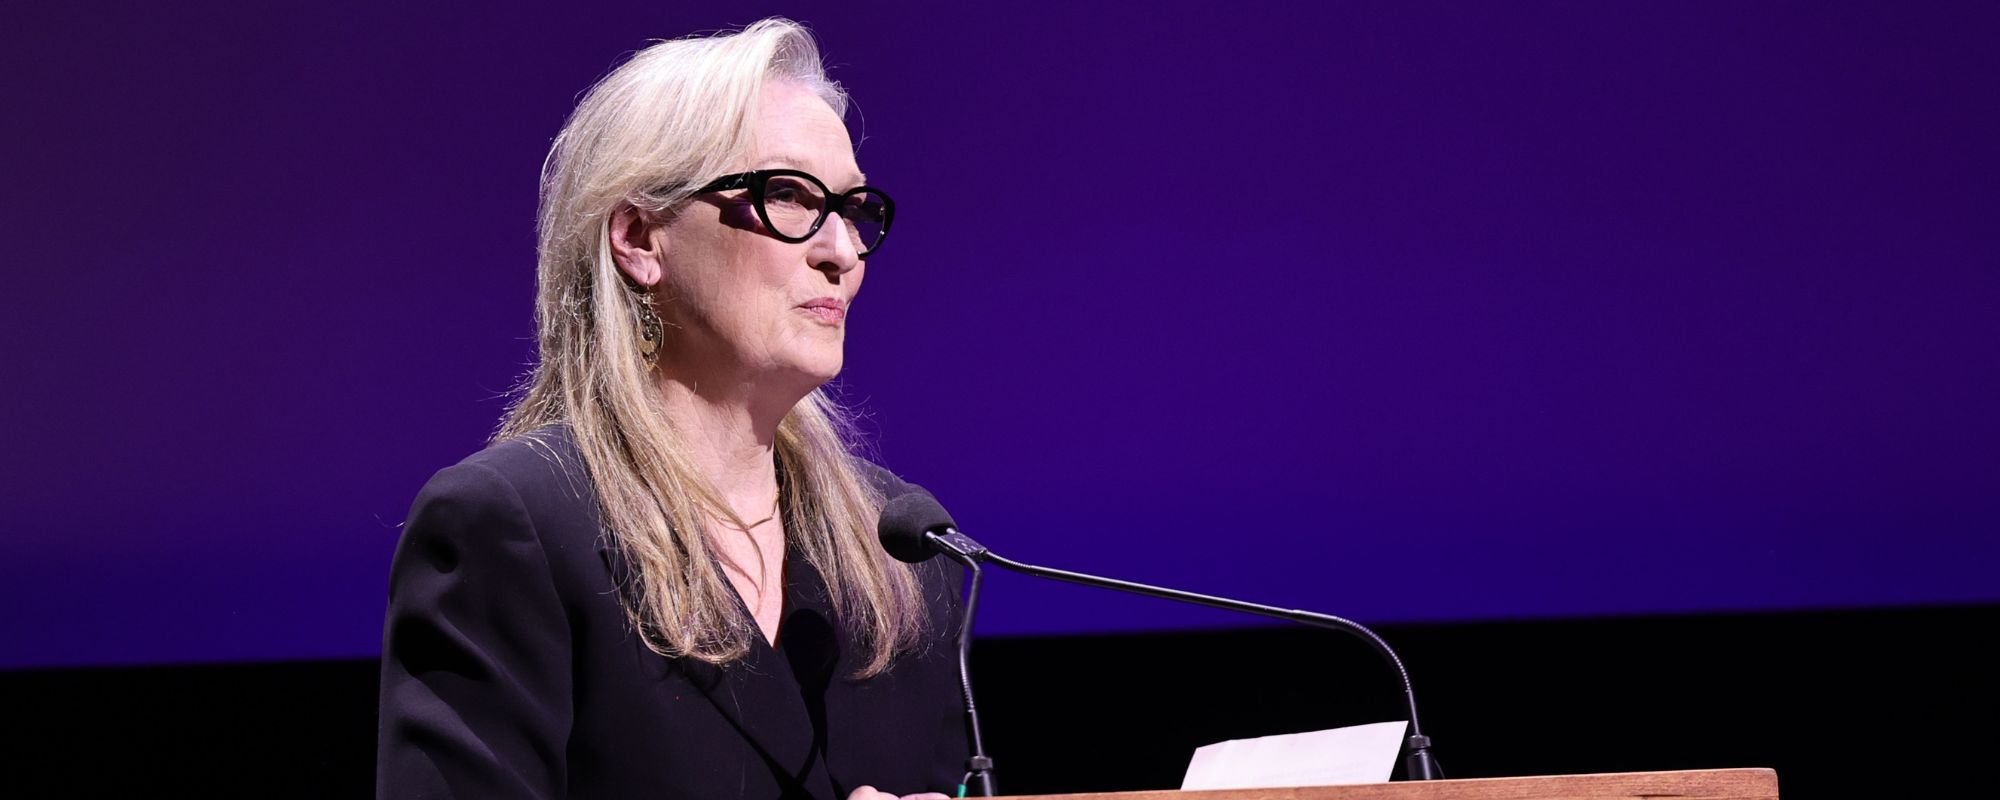 Meryl Streep Performs Song Written by Sara Bareilles in ‘Only Murders in the Building’